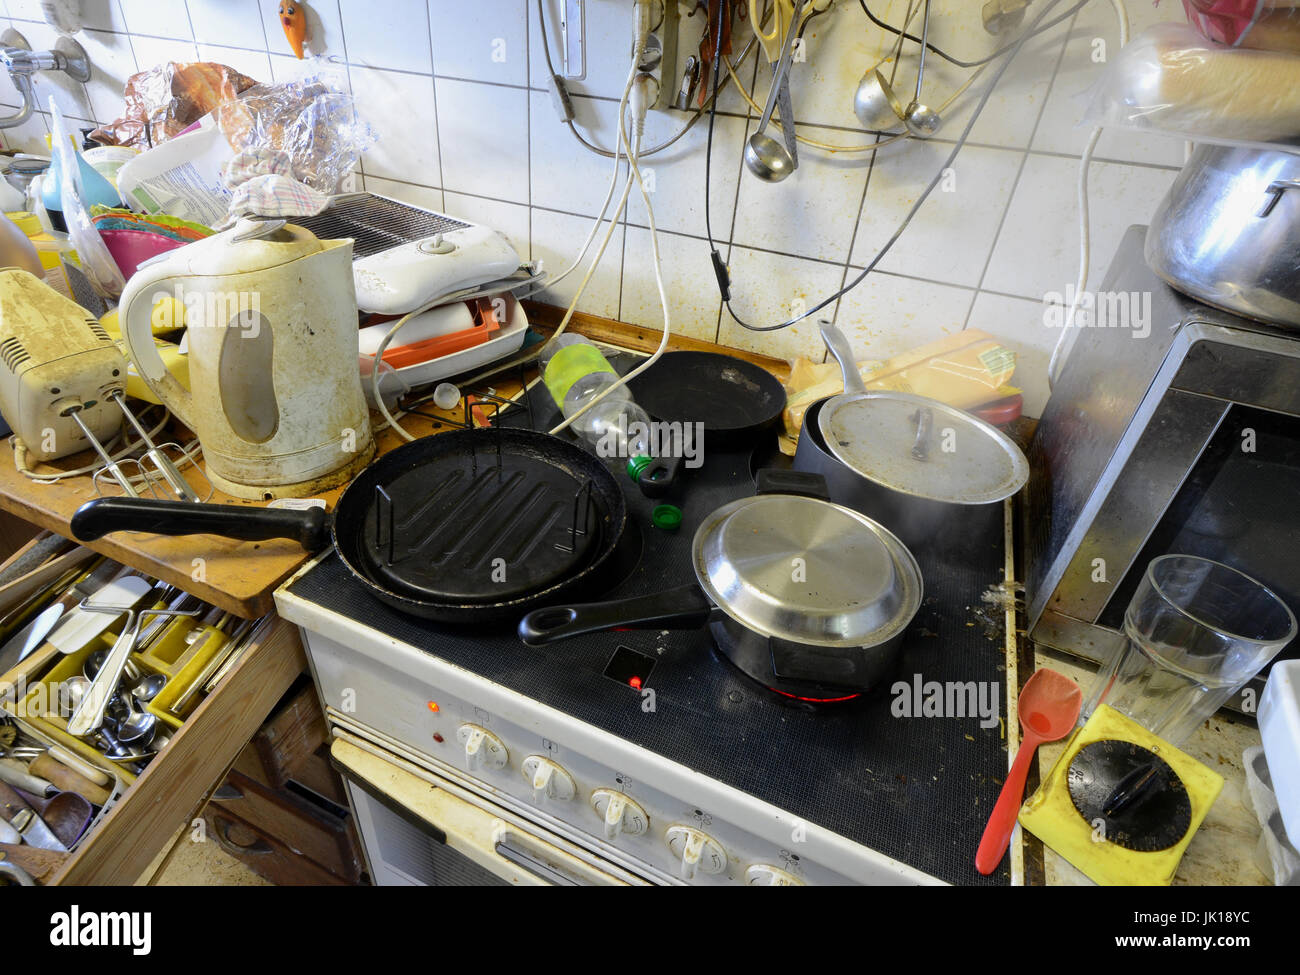 Messy and dirty kitchen Stock Photo - Alamy